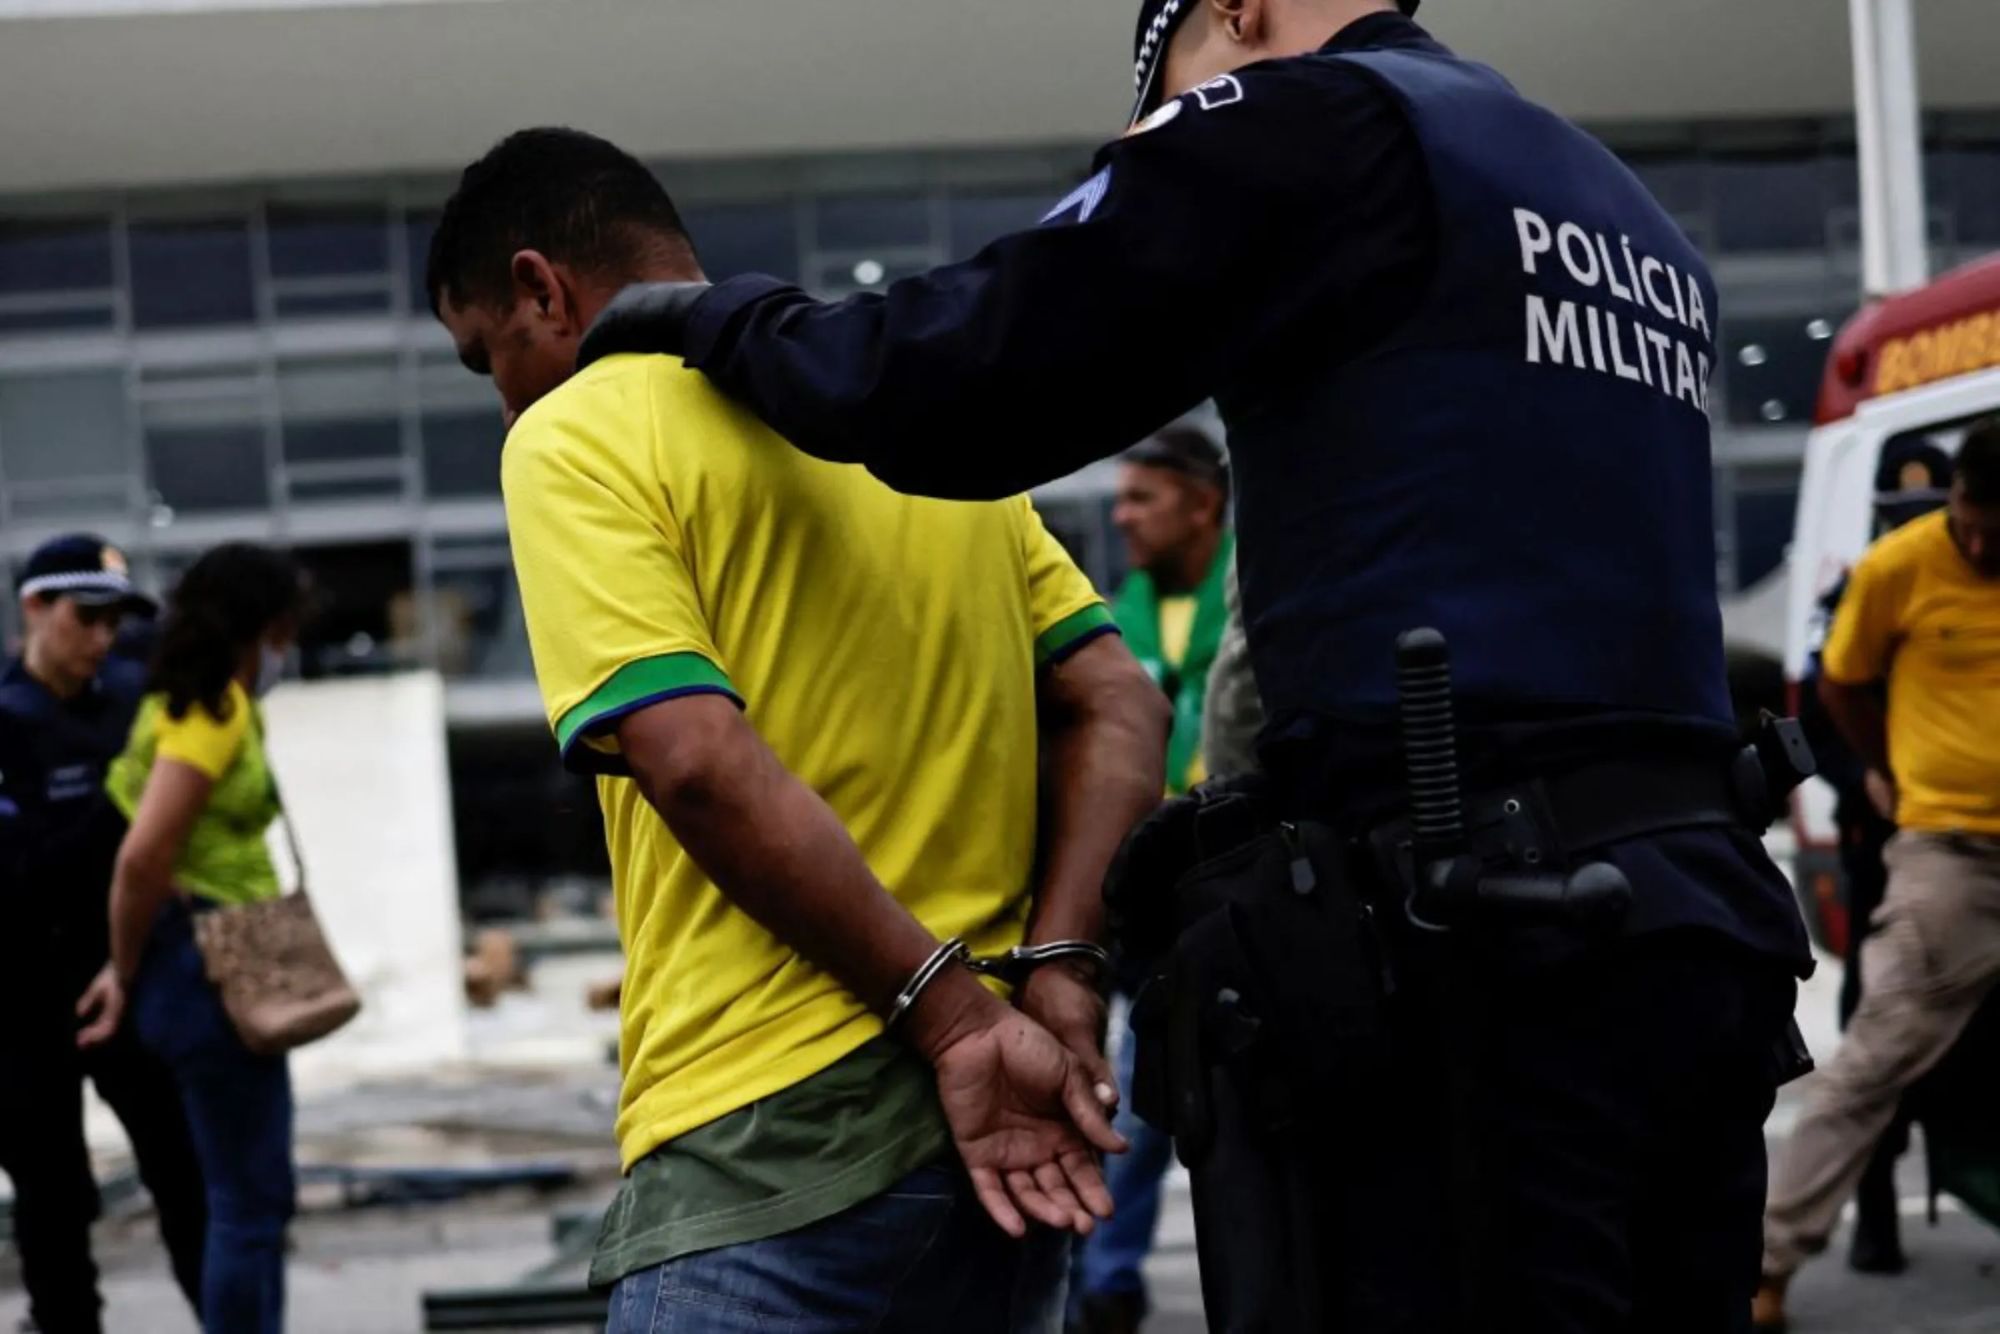 A supporter of Bolsonaro is detained during a demonstration against President Lula in Brasilia, January 8, 2023. REUTERS/Ueslei Marcelino